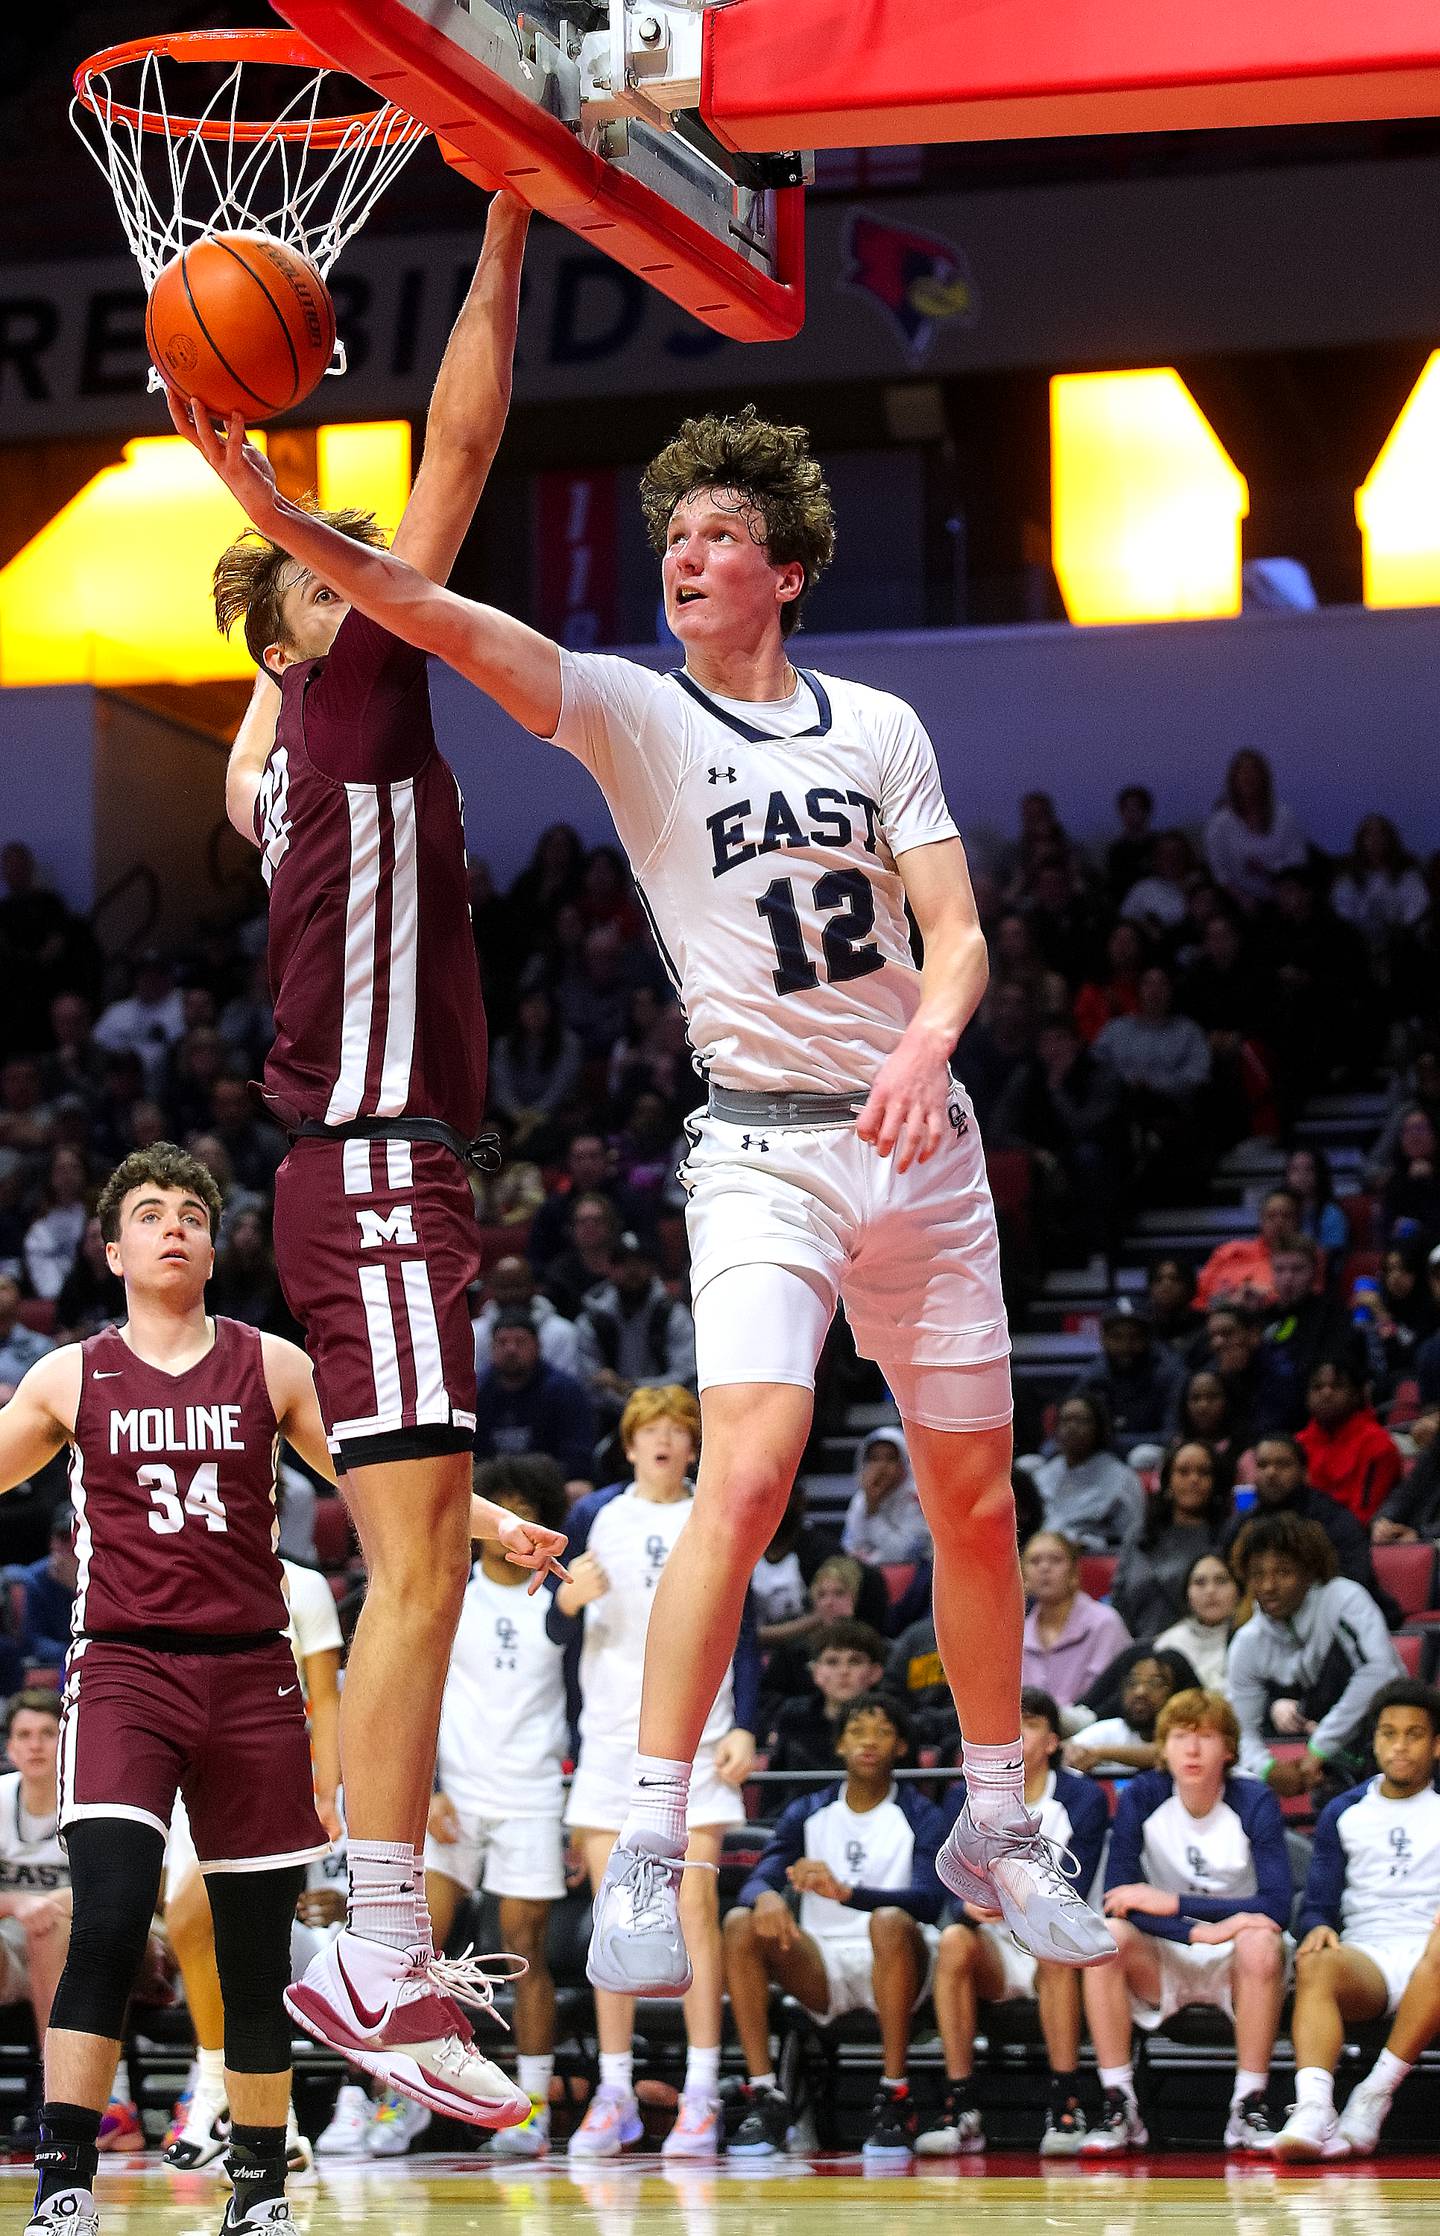 Oswego East's Ryan Johnson goes up for a reverse lay up around Moline's Trey Taylor during their supersectional game on Monday. The Wolves fell 59-55 to the Maroons ending this season Class 4A postseason run.    (Photo: PhotoNews Media/Clark Brooks)